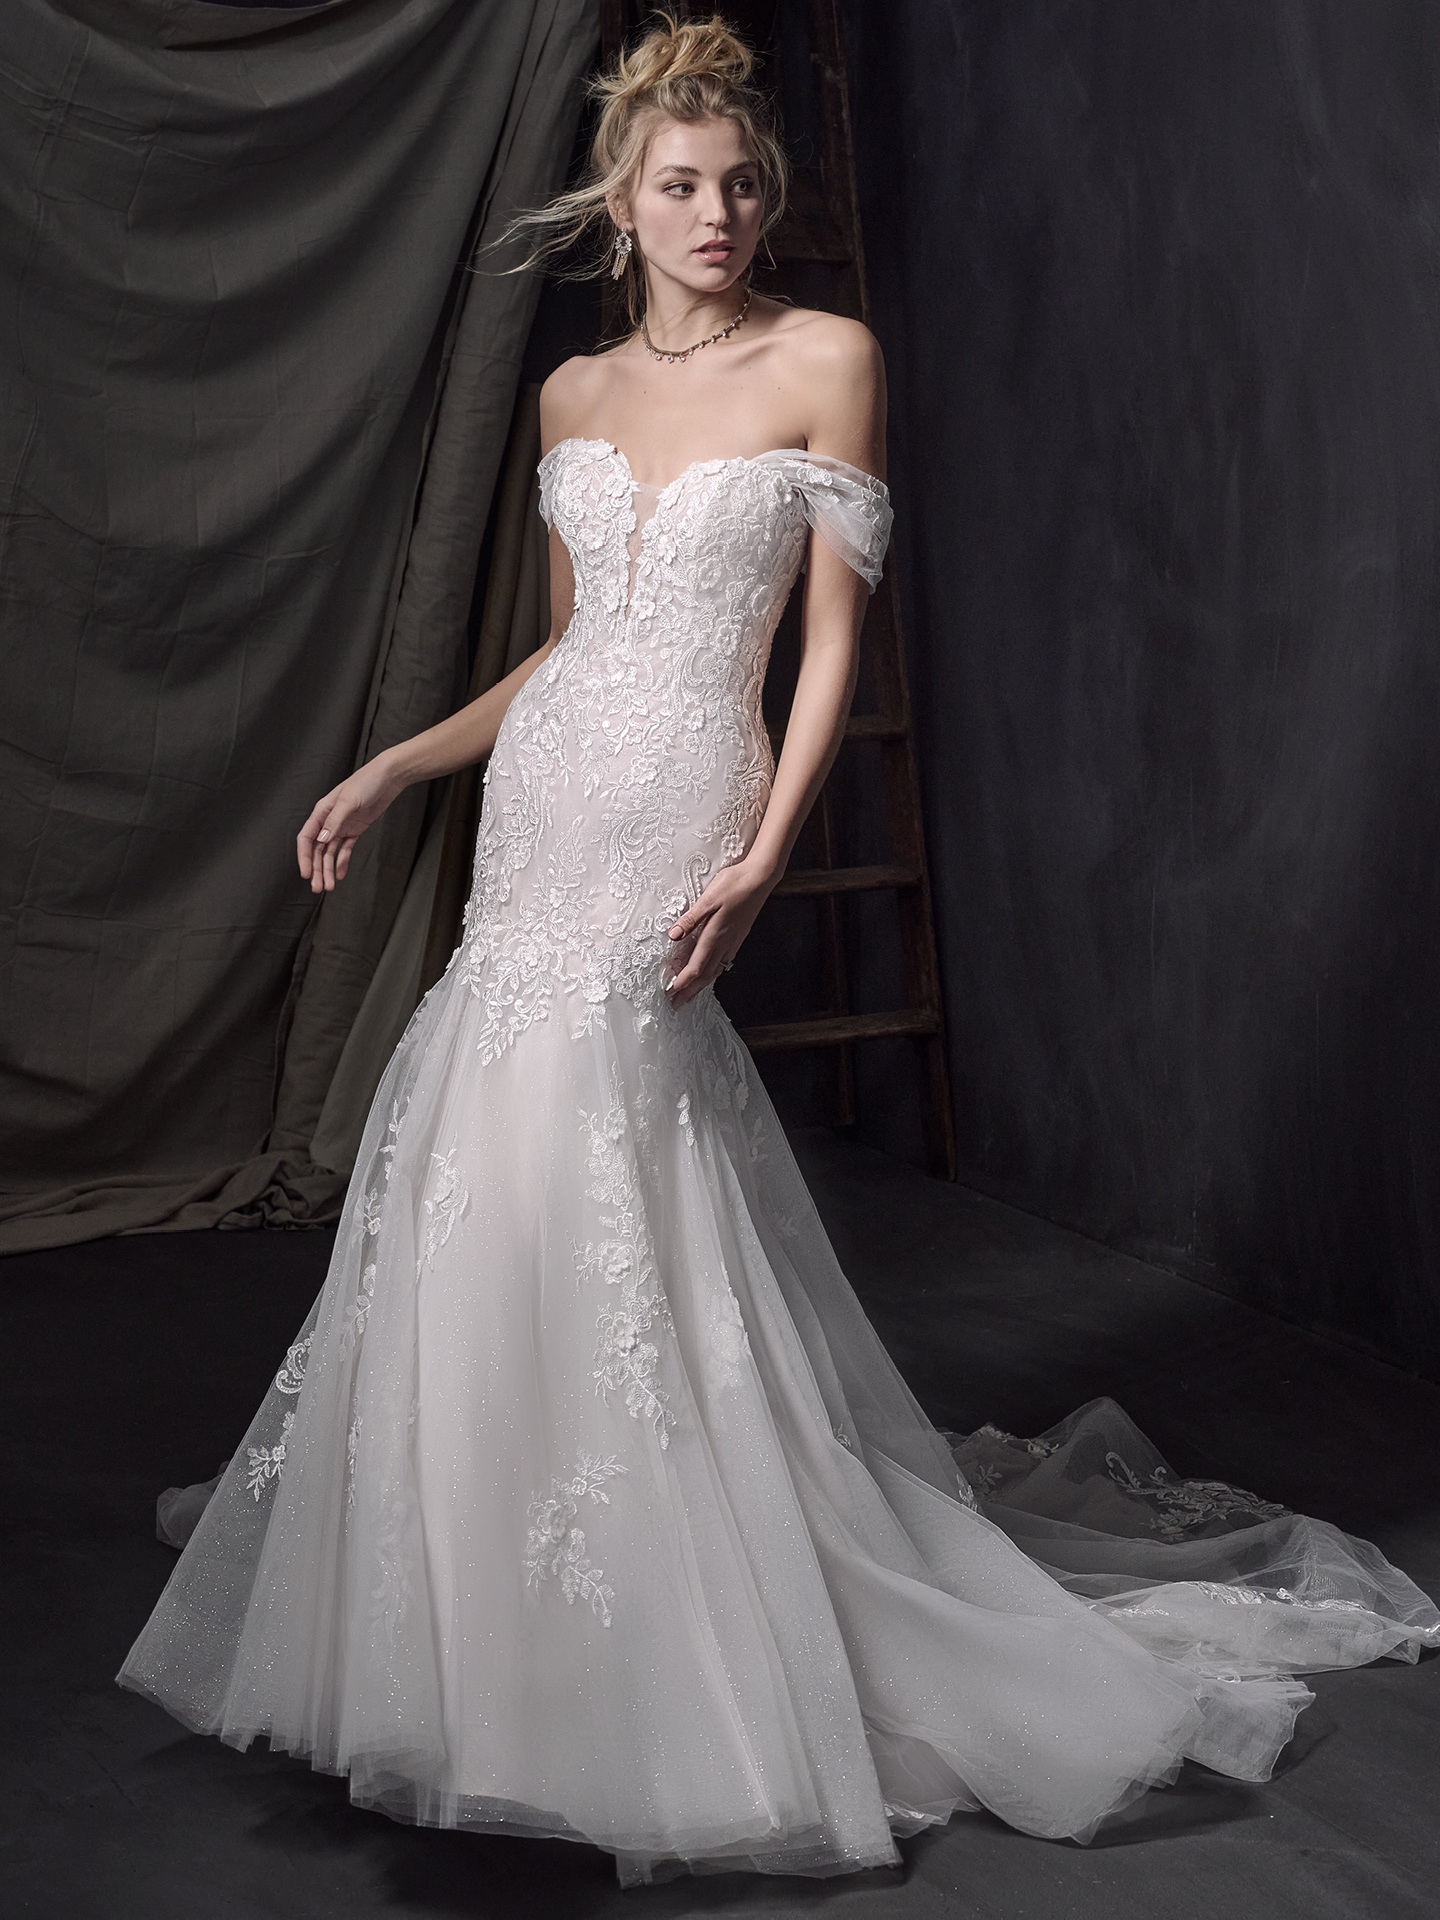 Boston Beaded Statement Bridal Gown by Sottero & Midgley